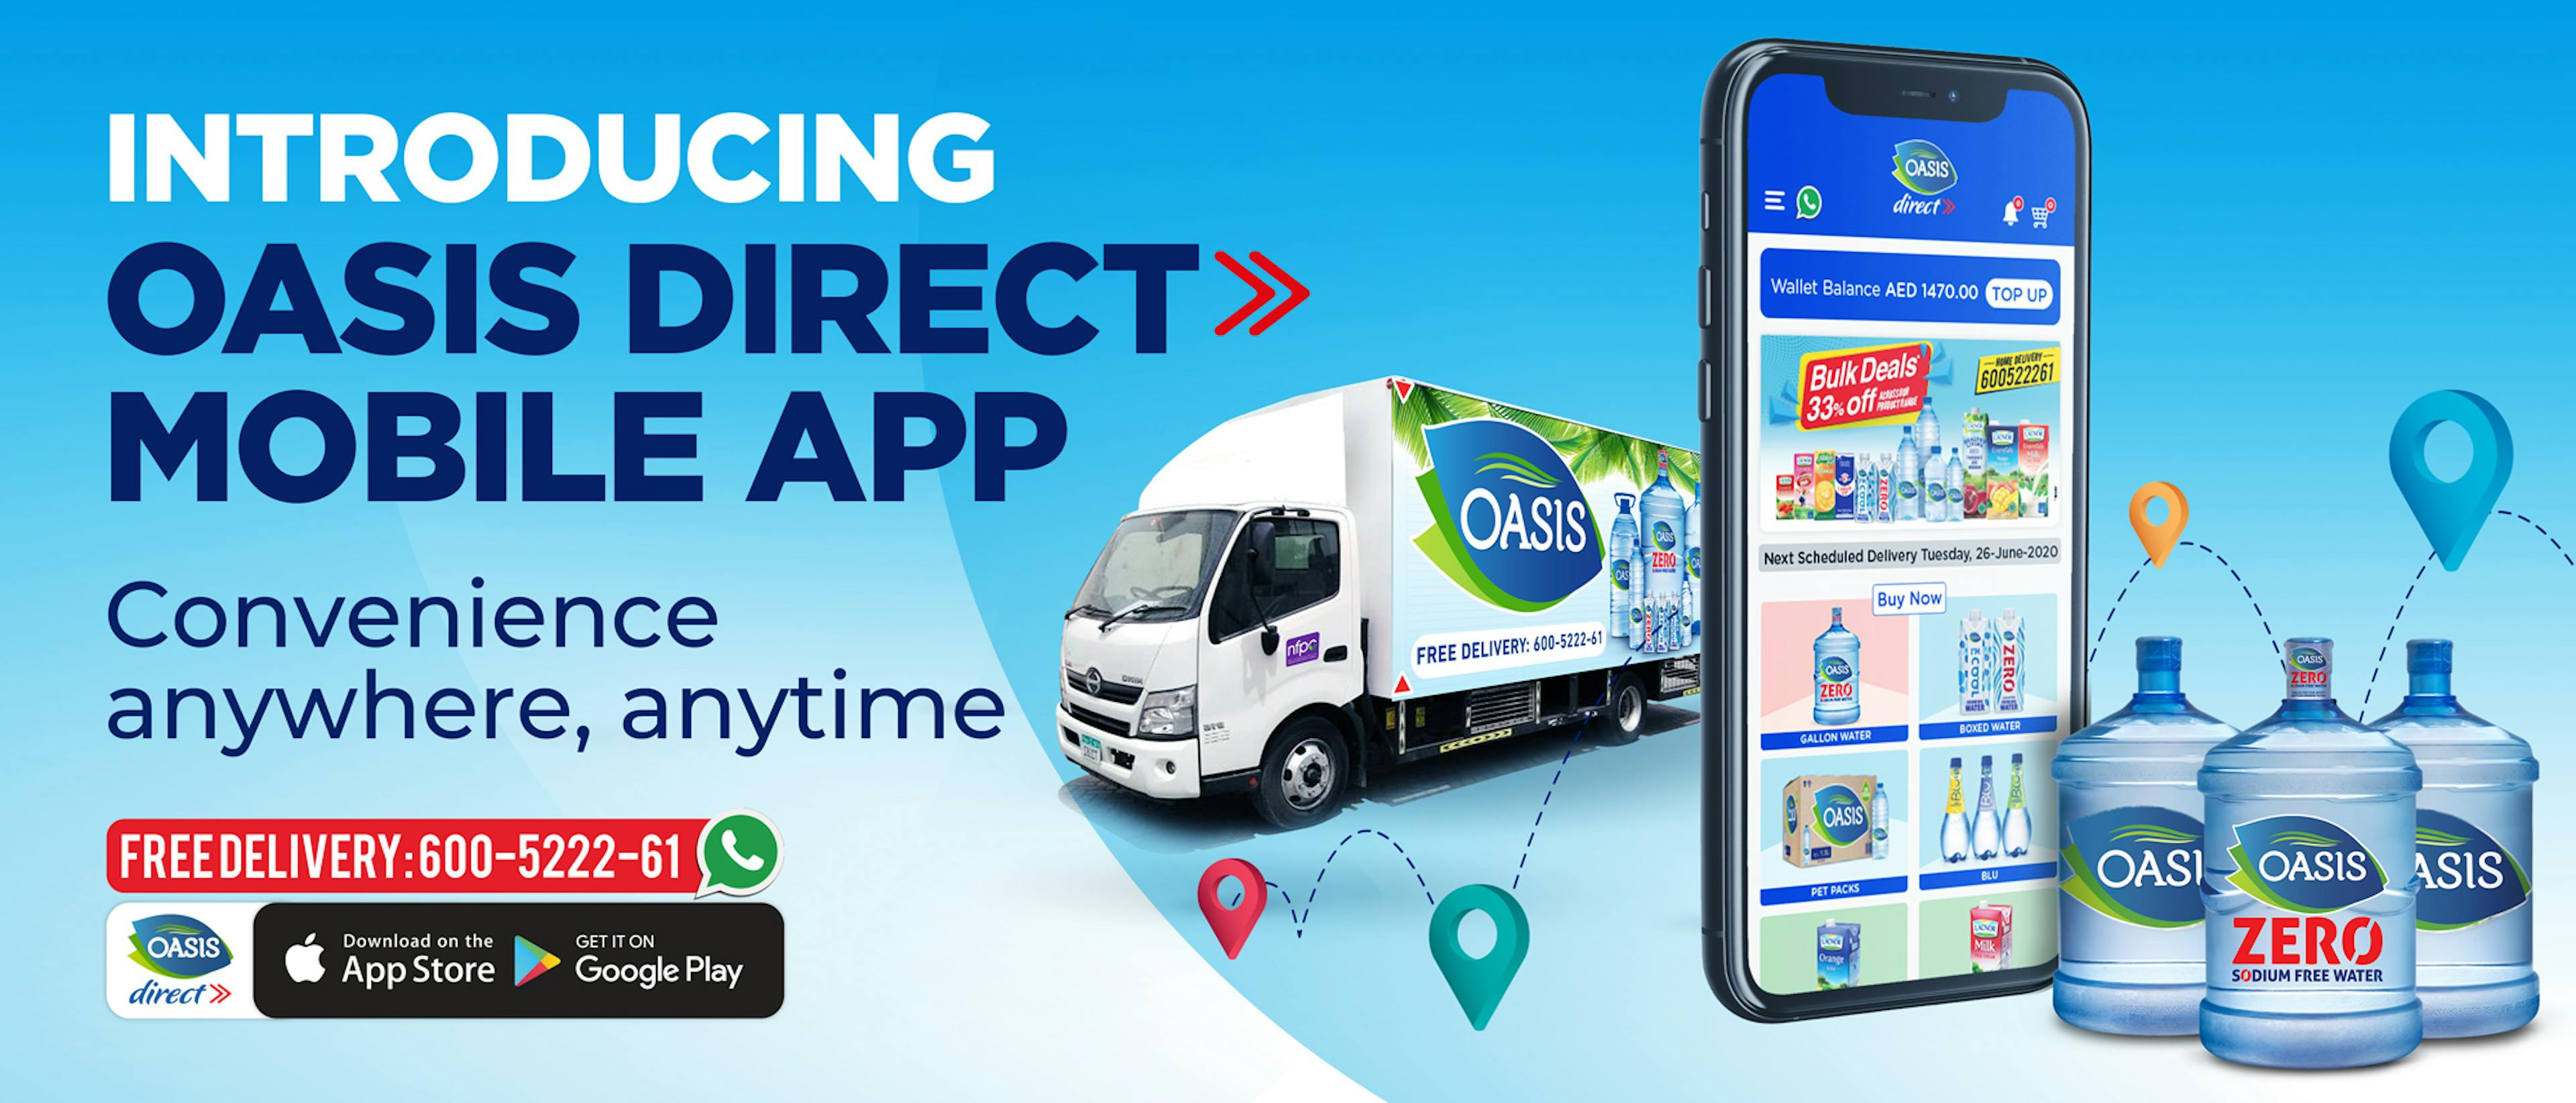 Oasis Direct Mobile App